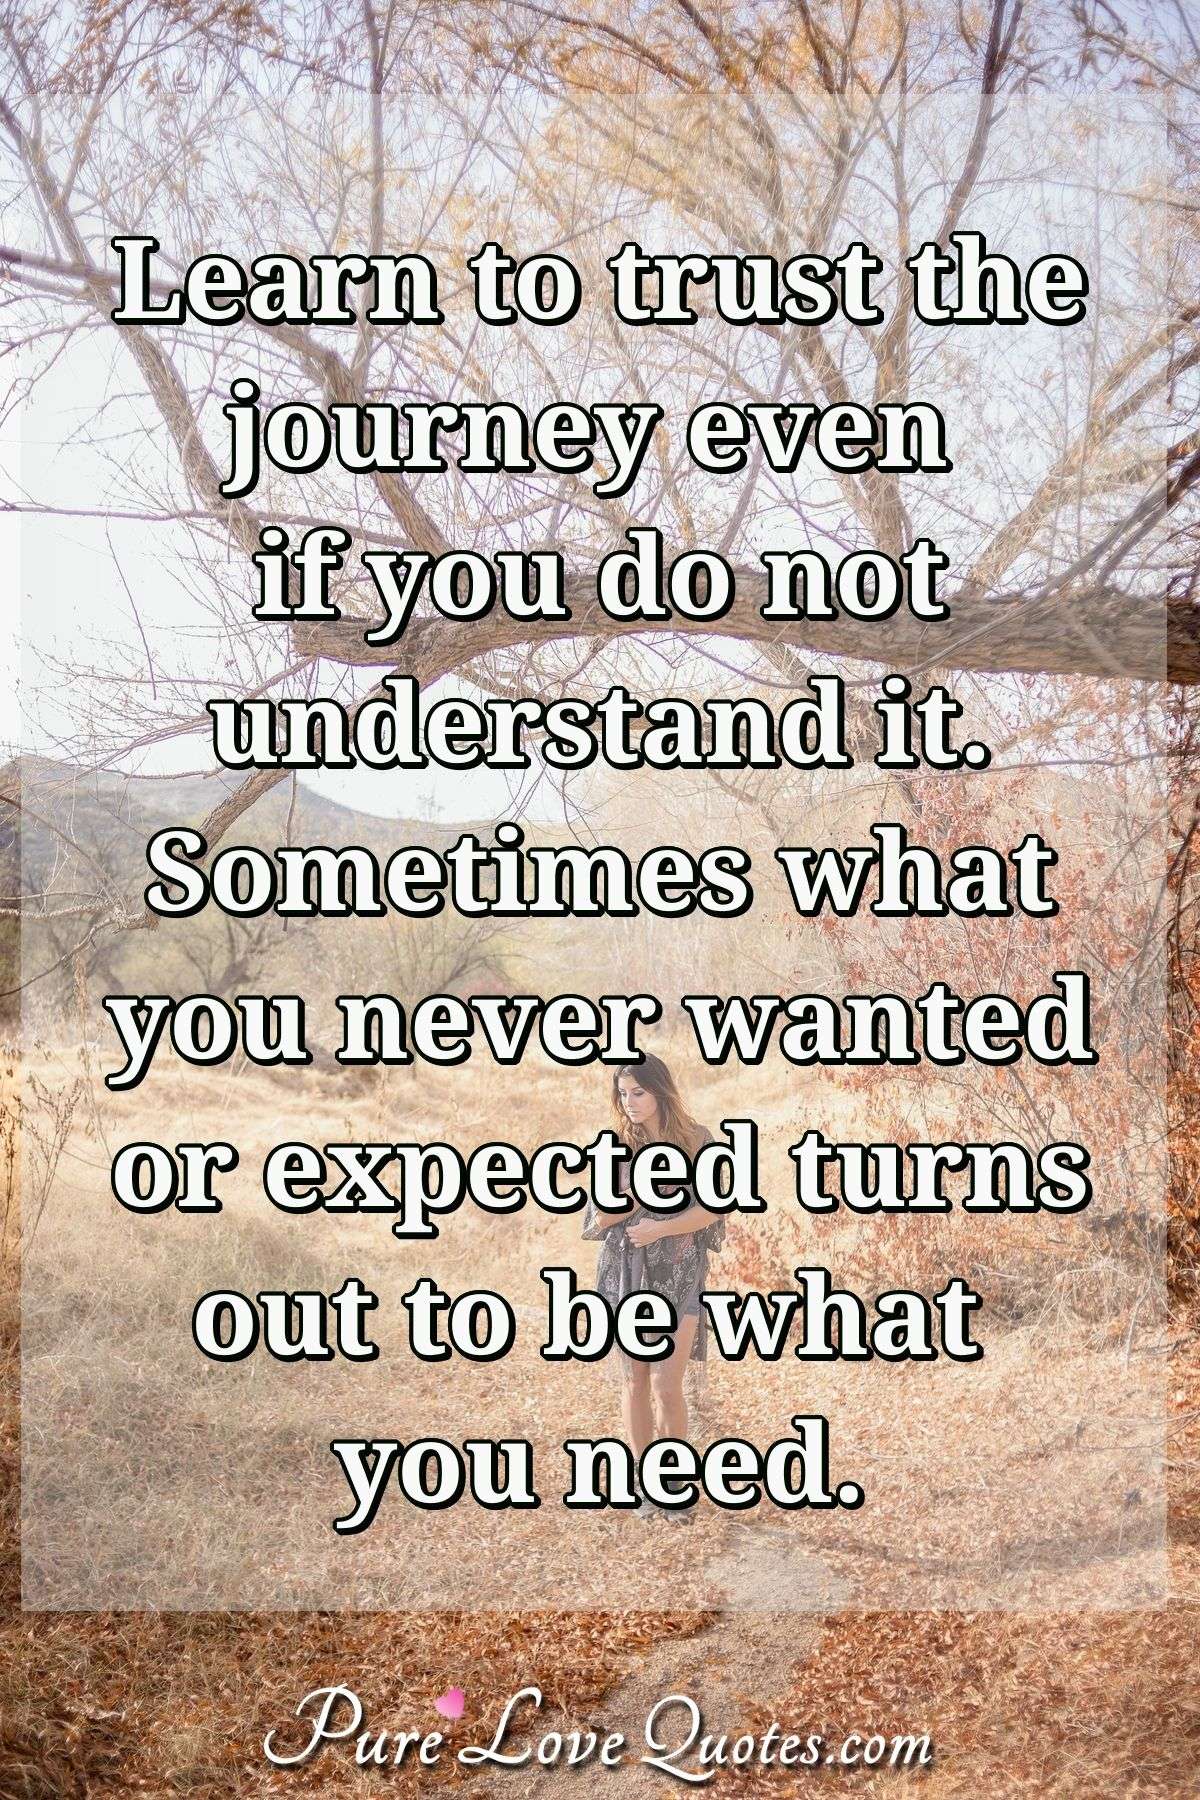 meaning of trust your journey